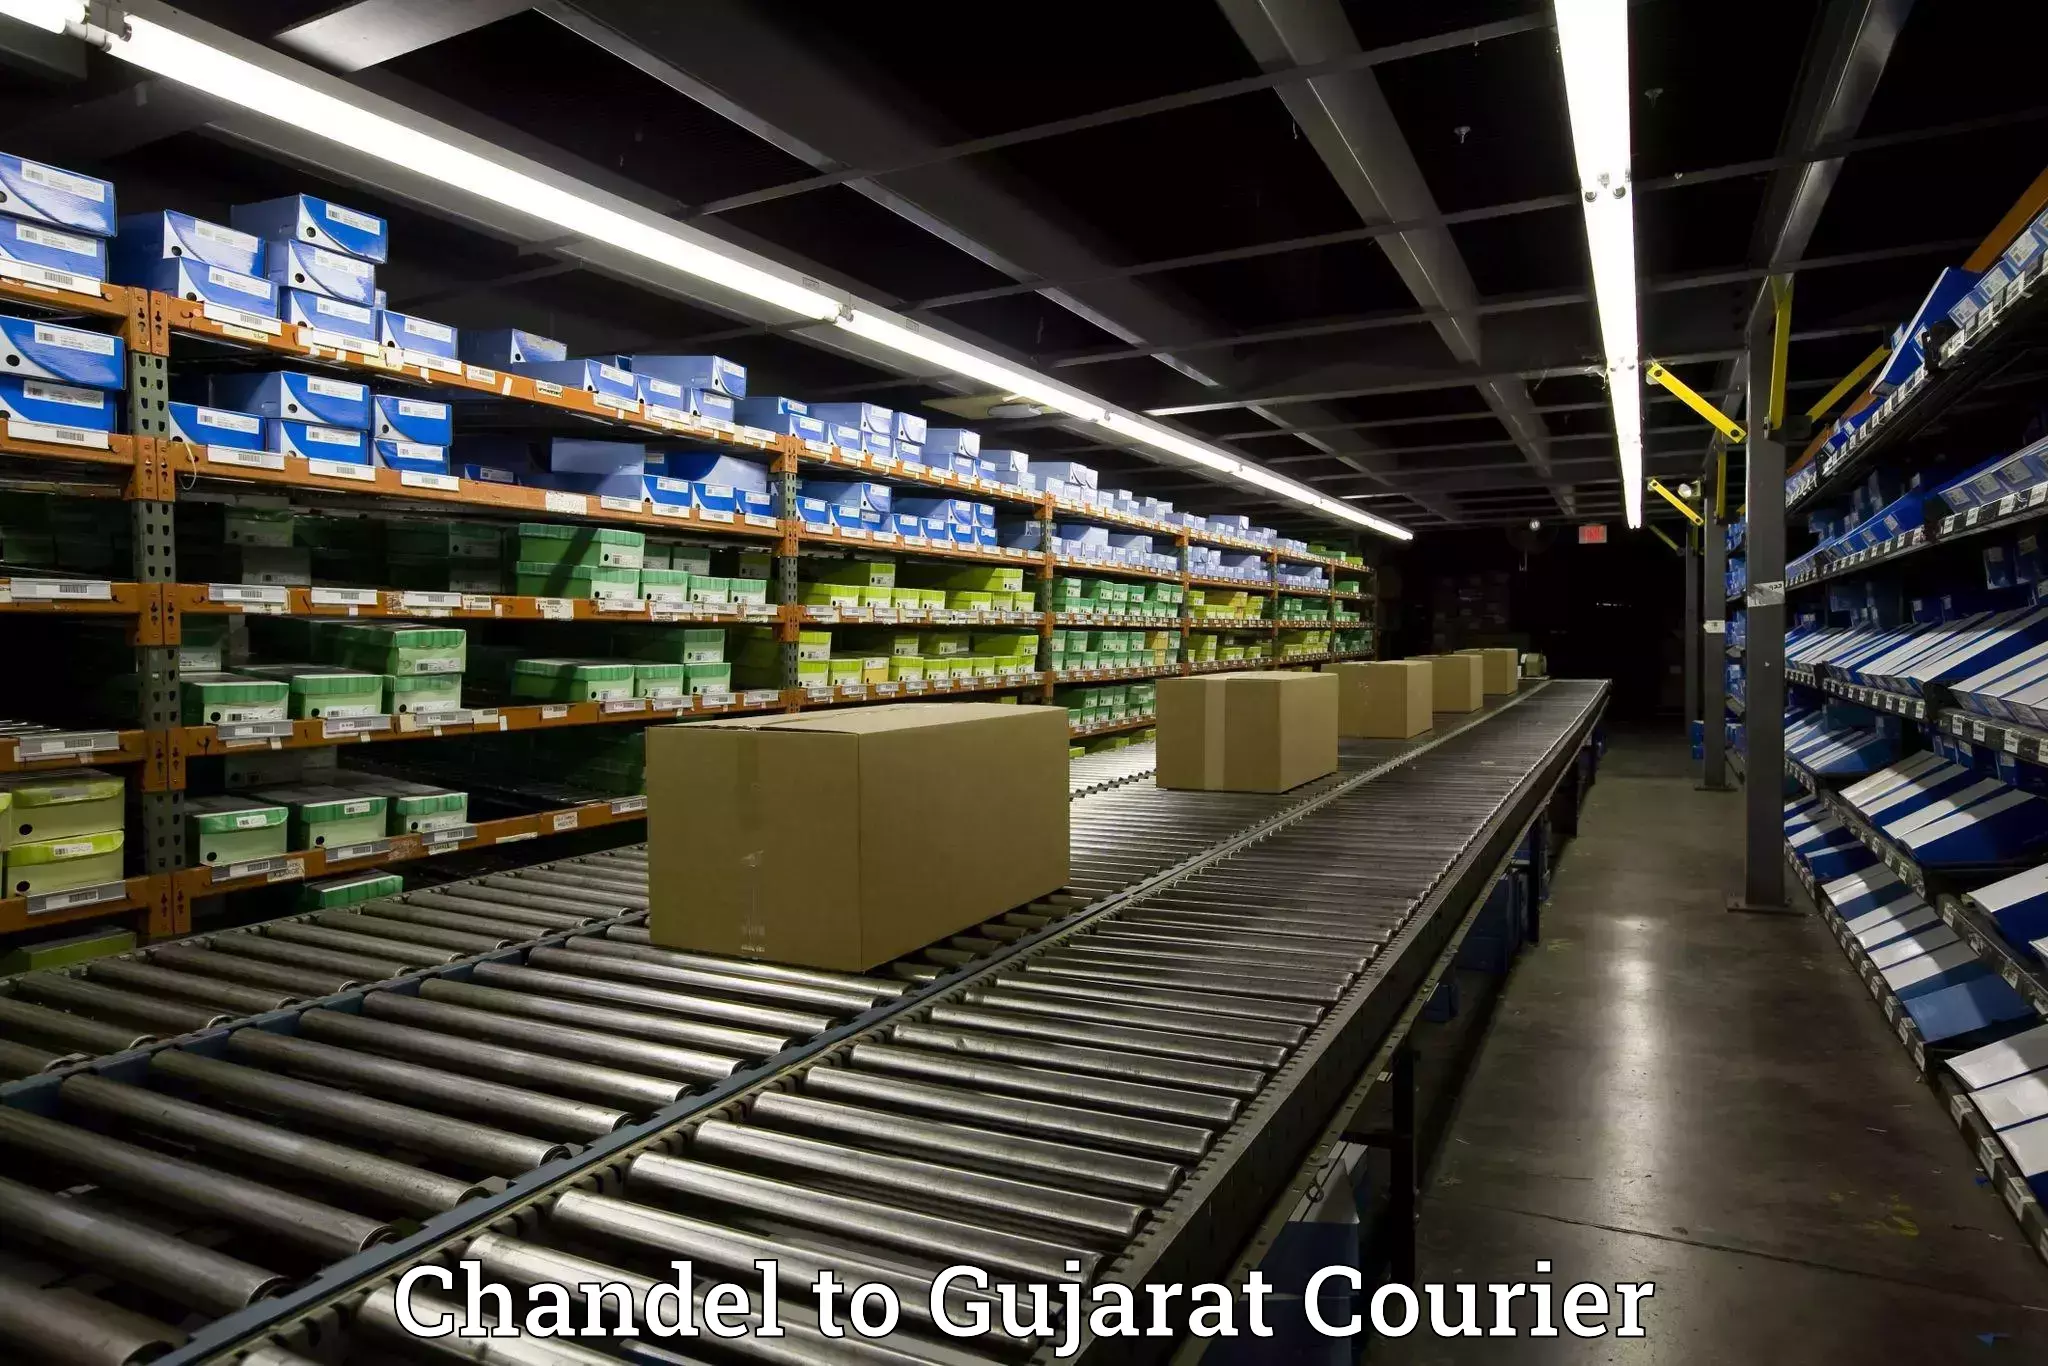 Cost-effective moving options Chandel to Ahmedabad